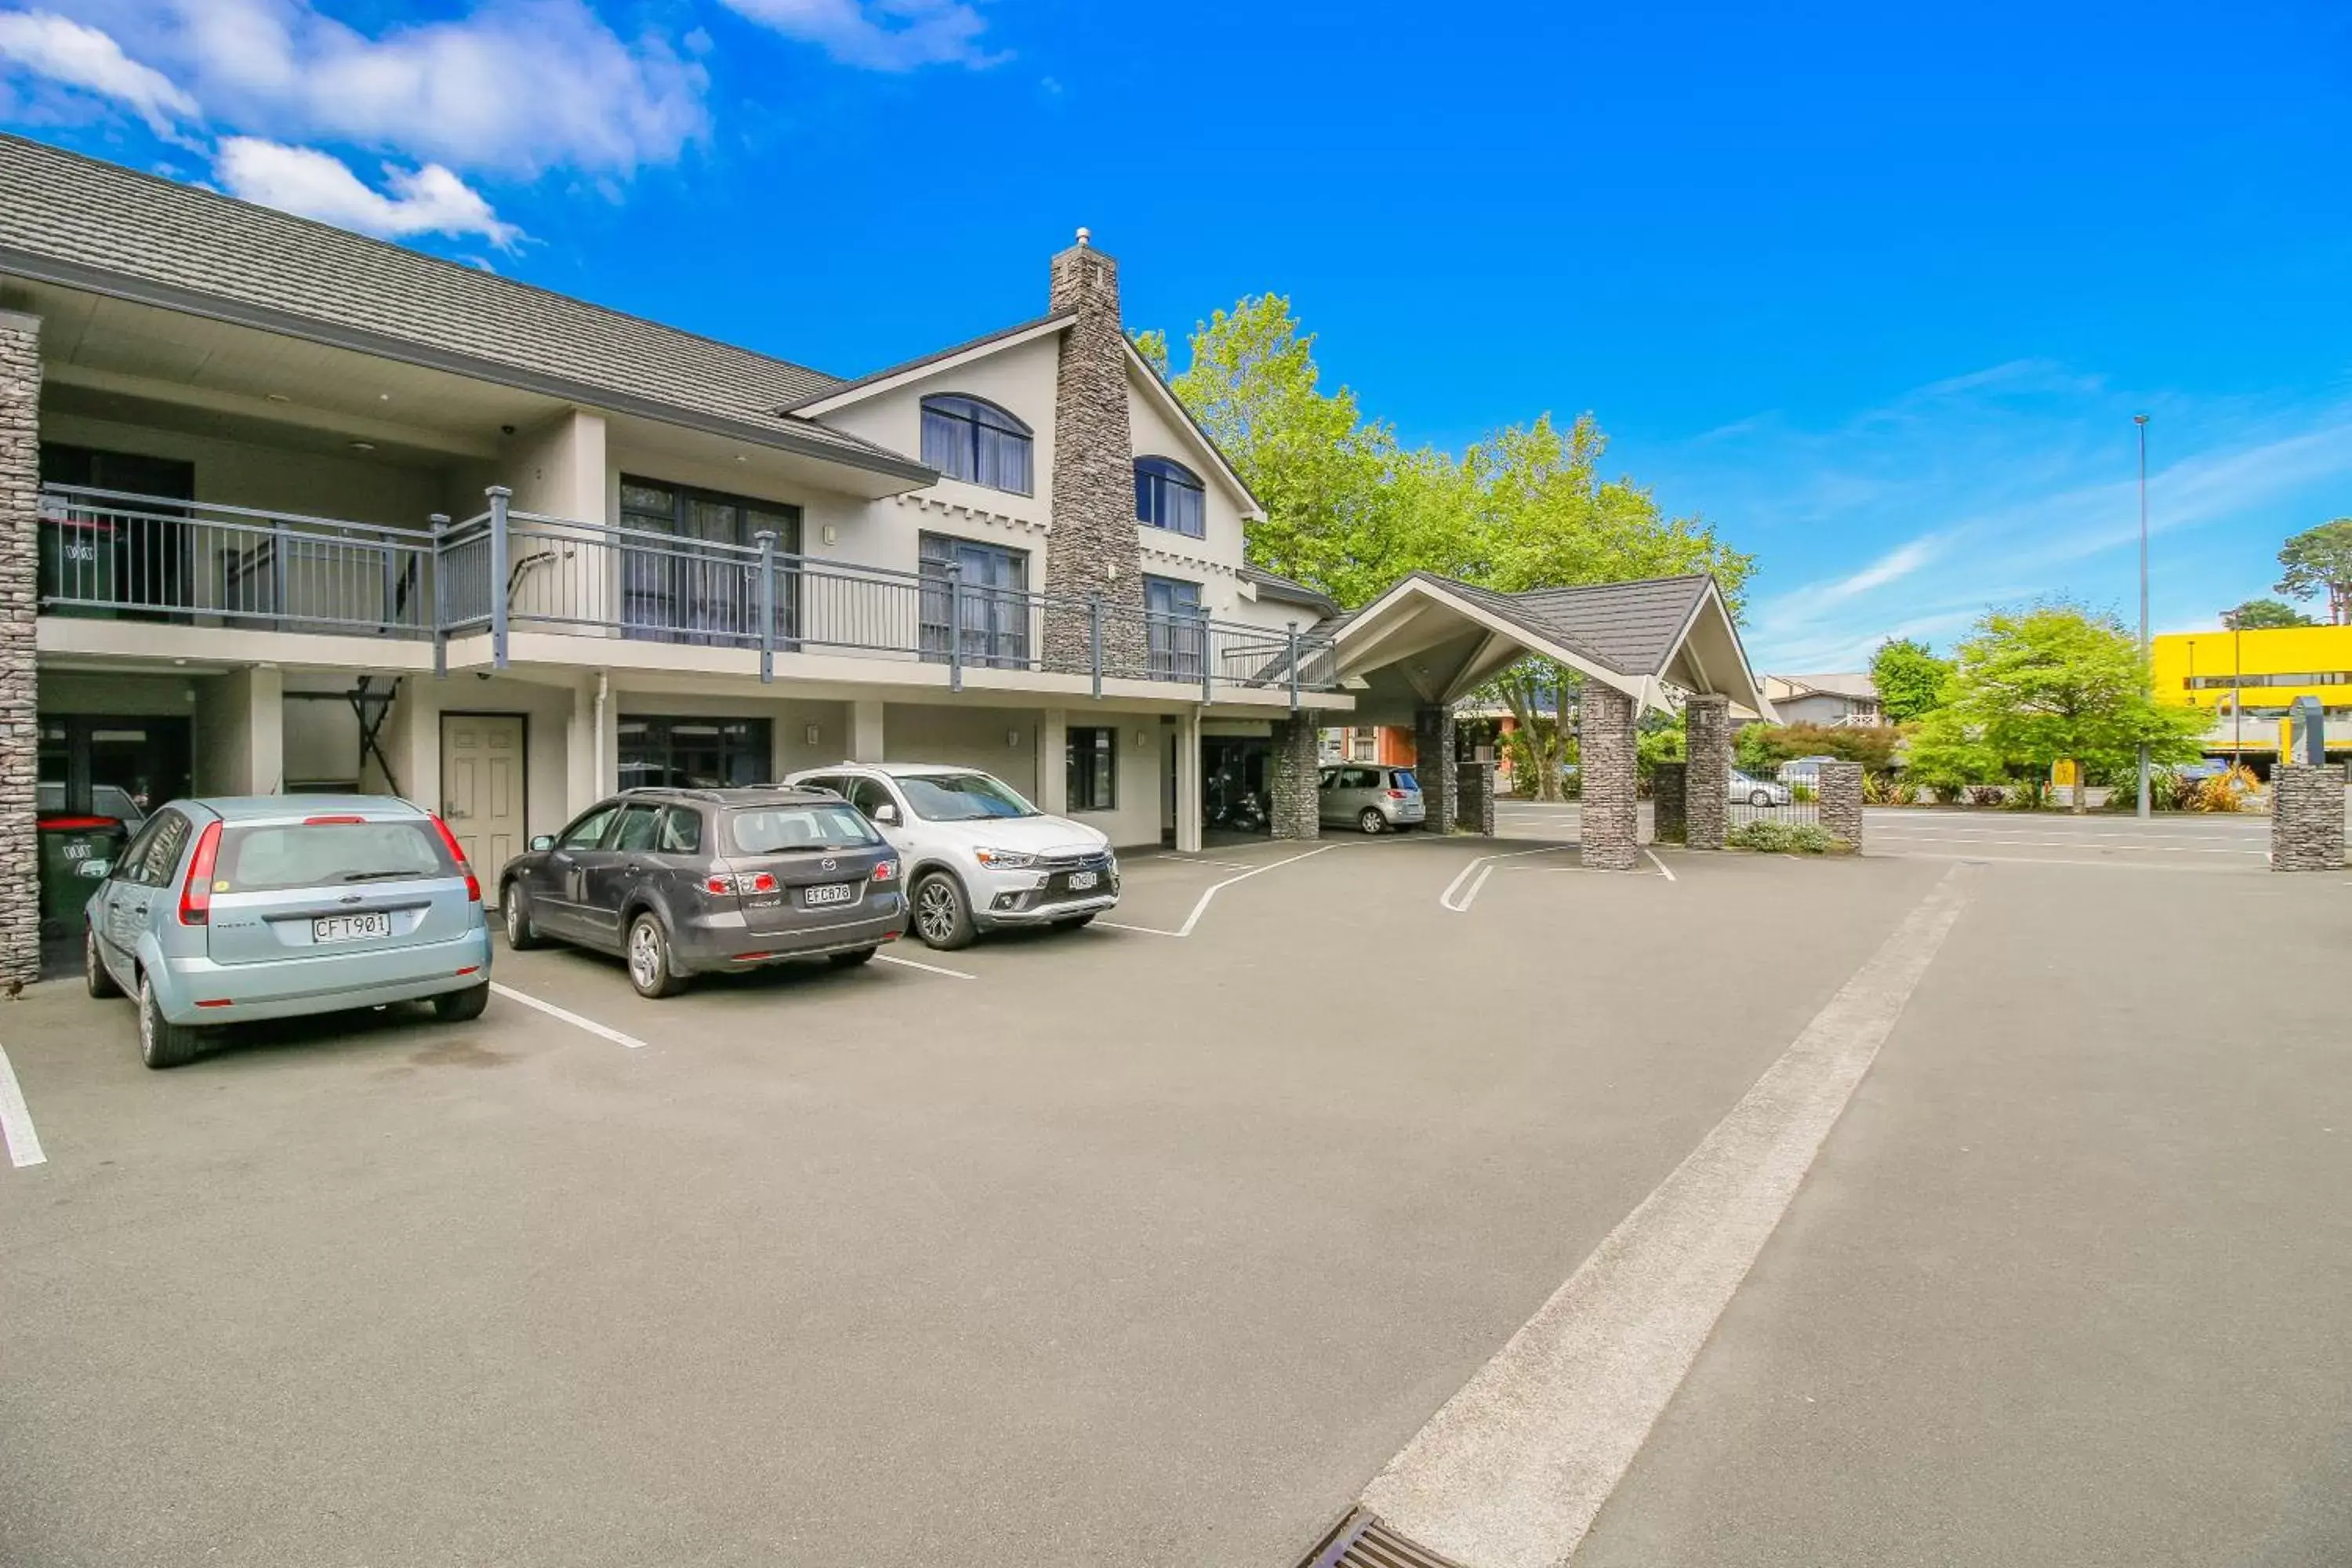 Property Building in Aotea Motor Lodge